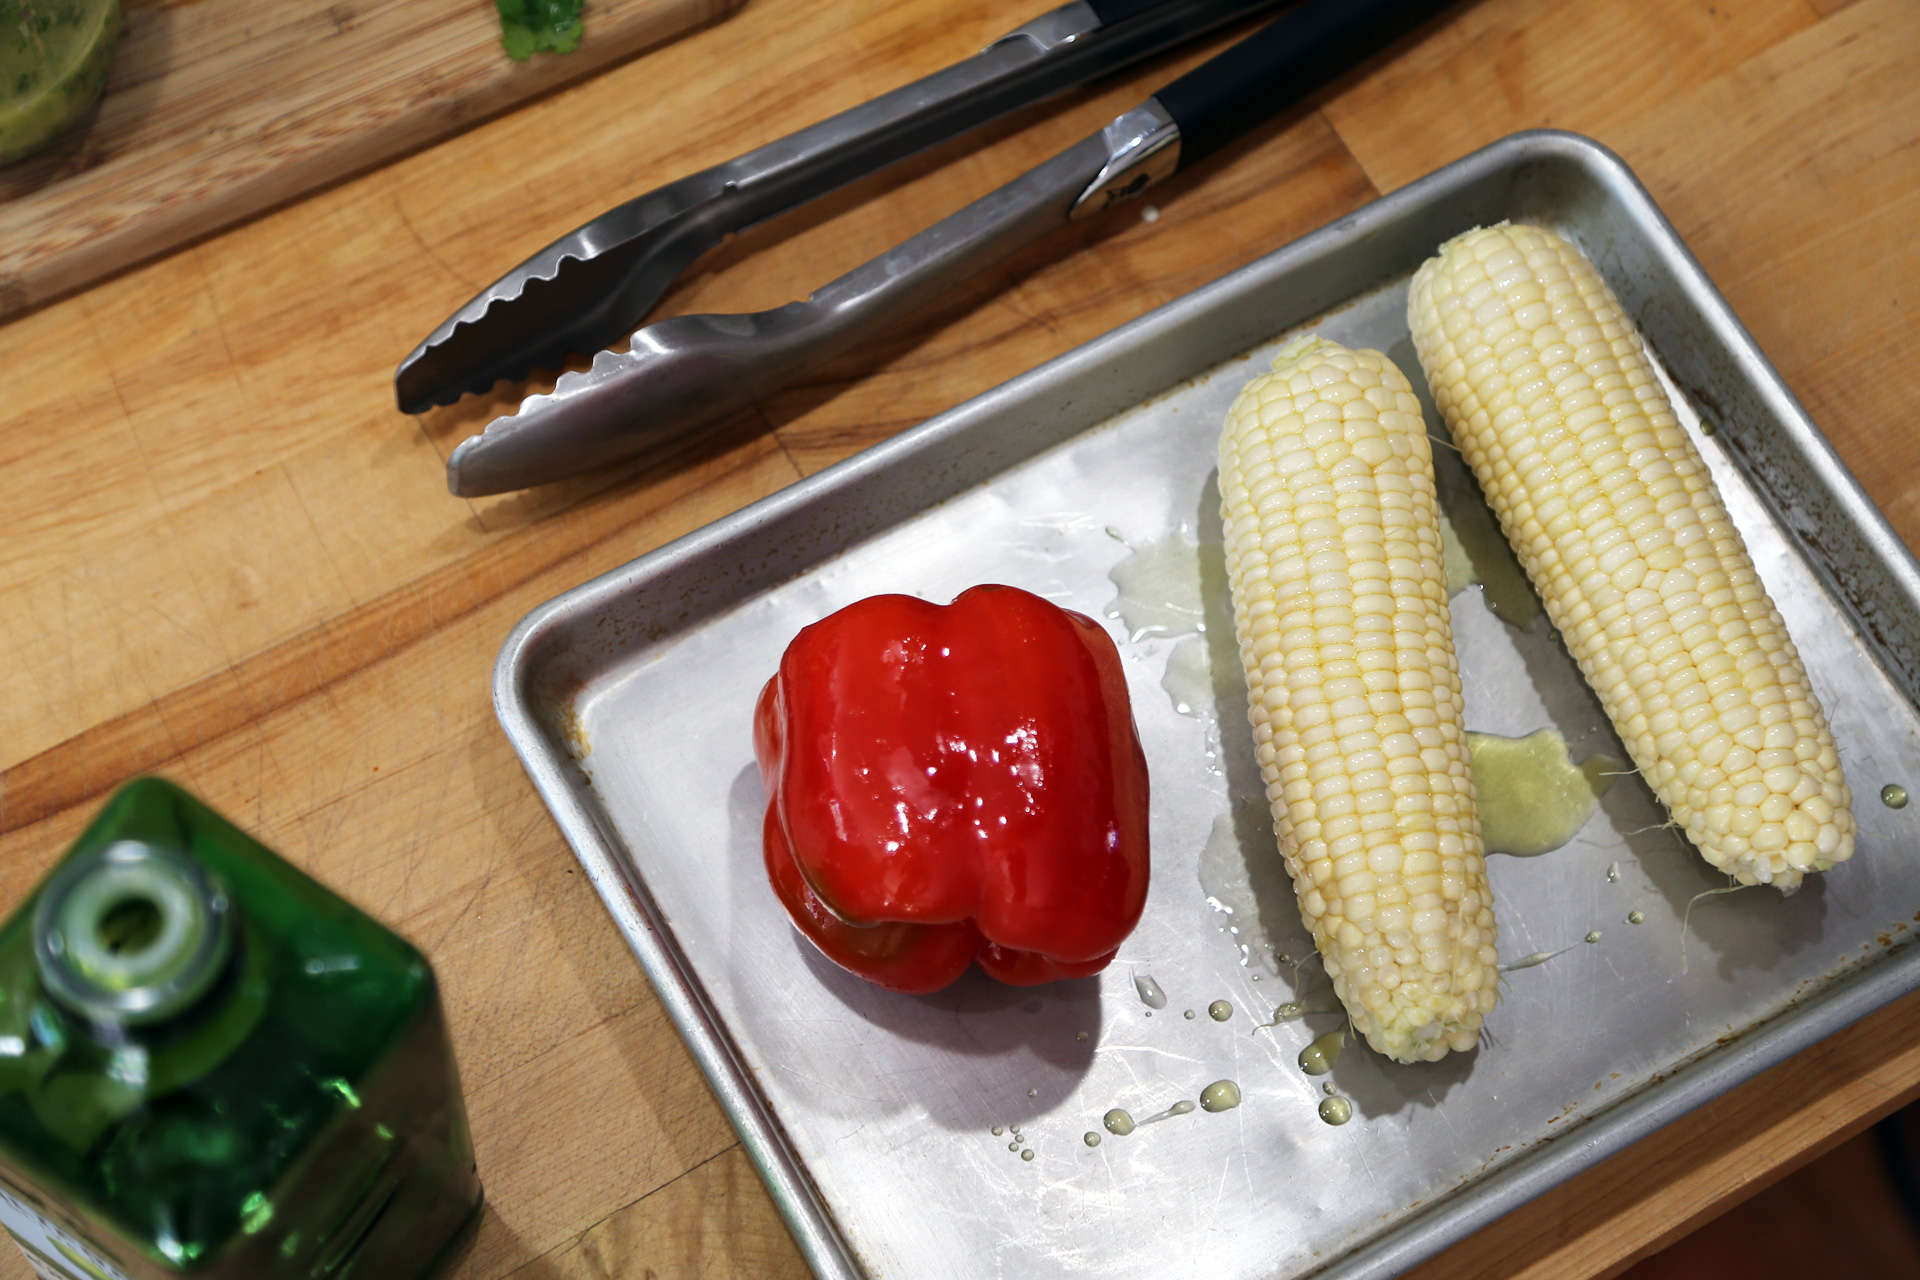 Coat the corn and pepper in olive oil.